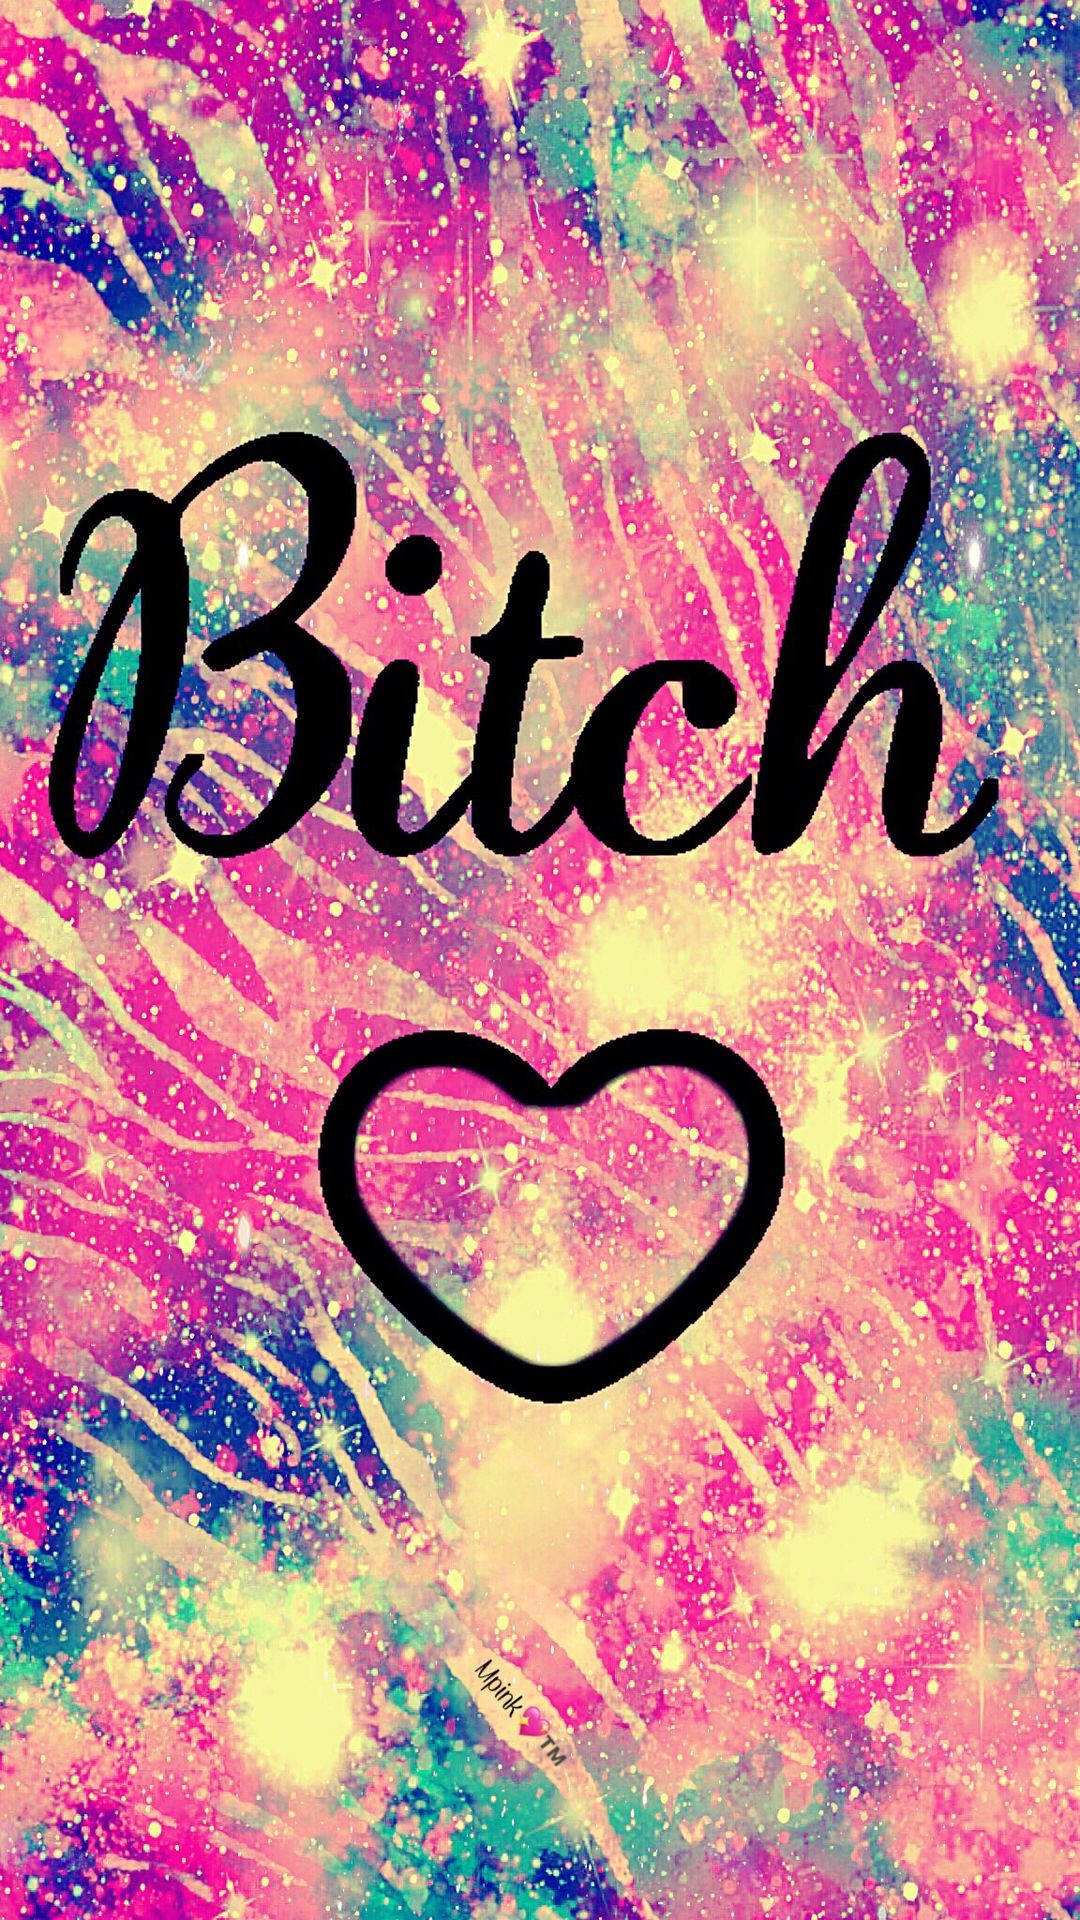 1080x1920 Bitch Galaxy Wallpaper #androidwallpaper #iphonewallpaper #wallpaper  #galaxy #sparkle #glitter #lockscreen #pretty #pink #cute #girly #vintage  #heart #words ...